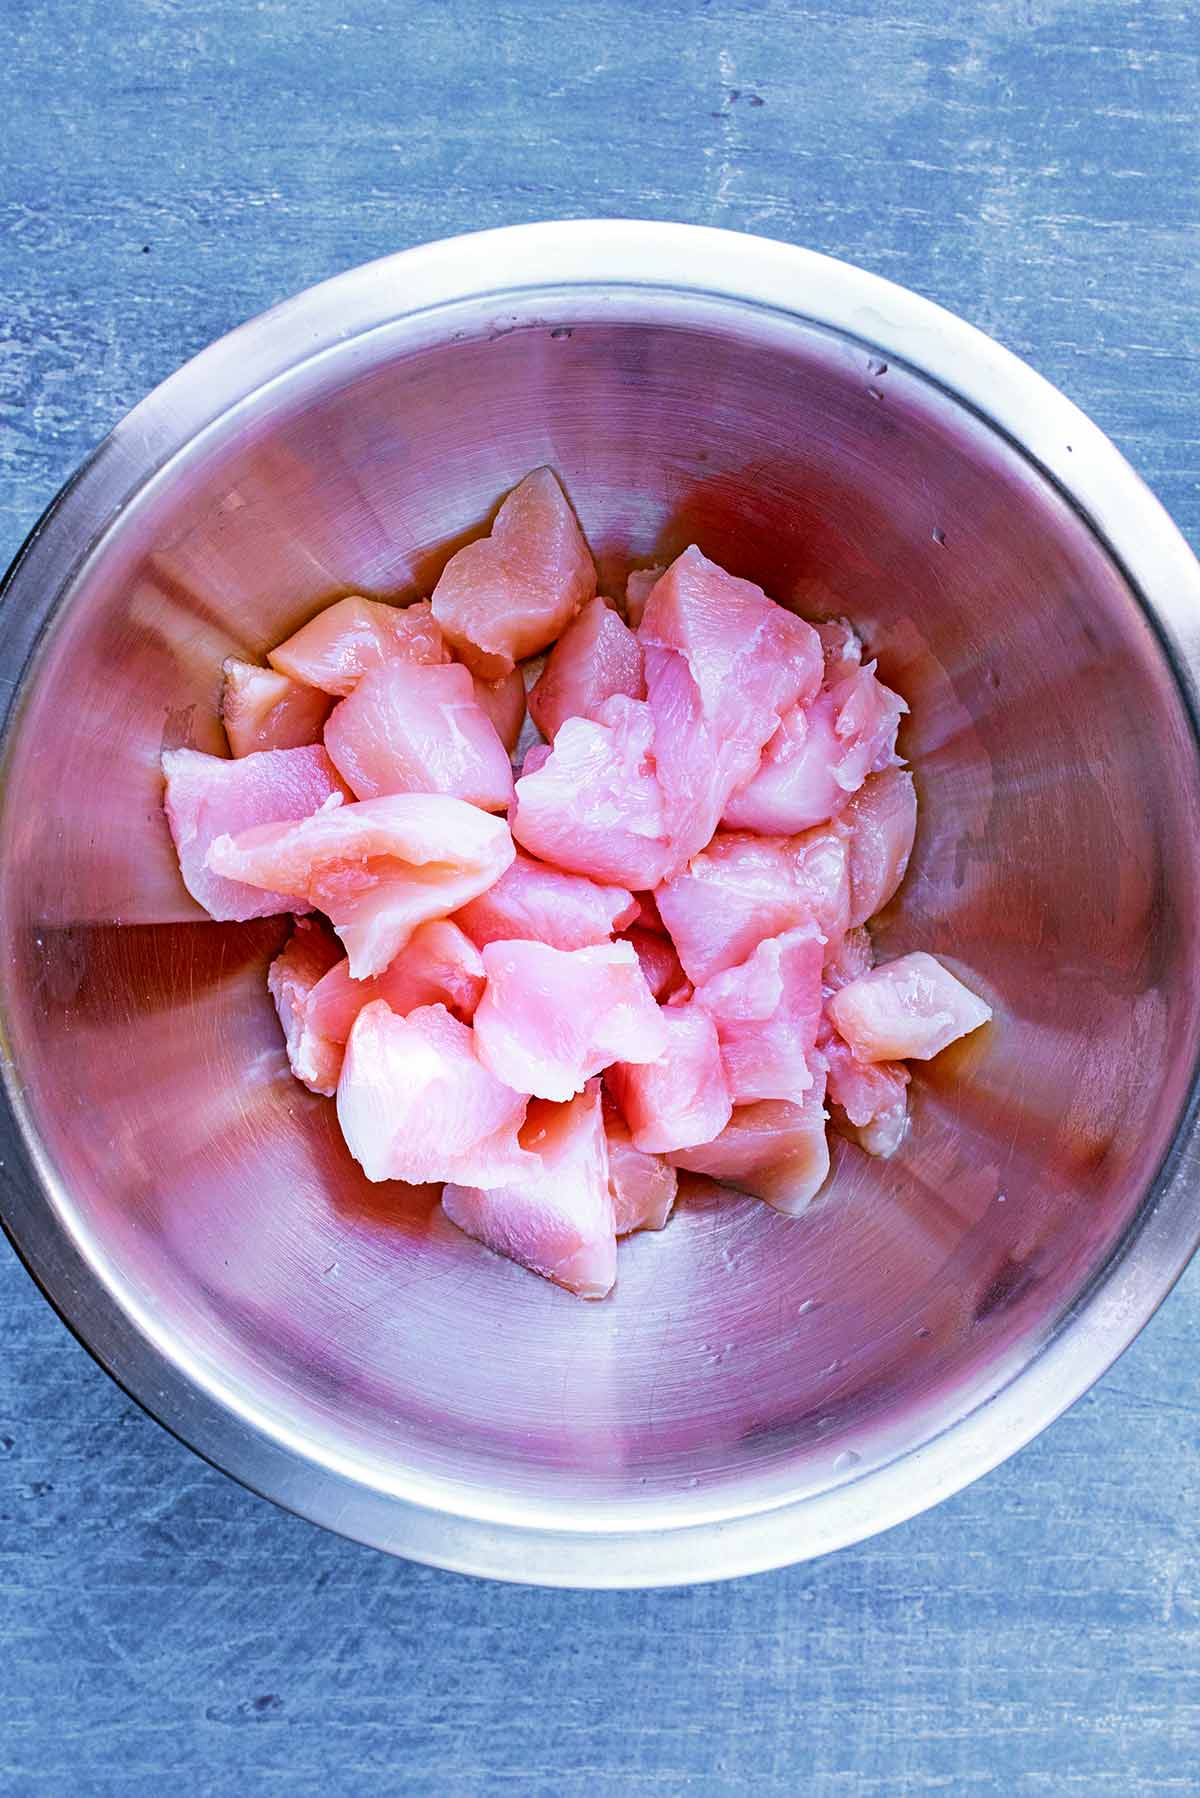 Chunks of raw chicken breast in a metal mixing bowl.